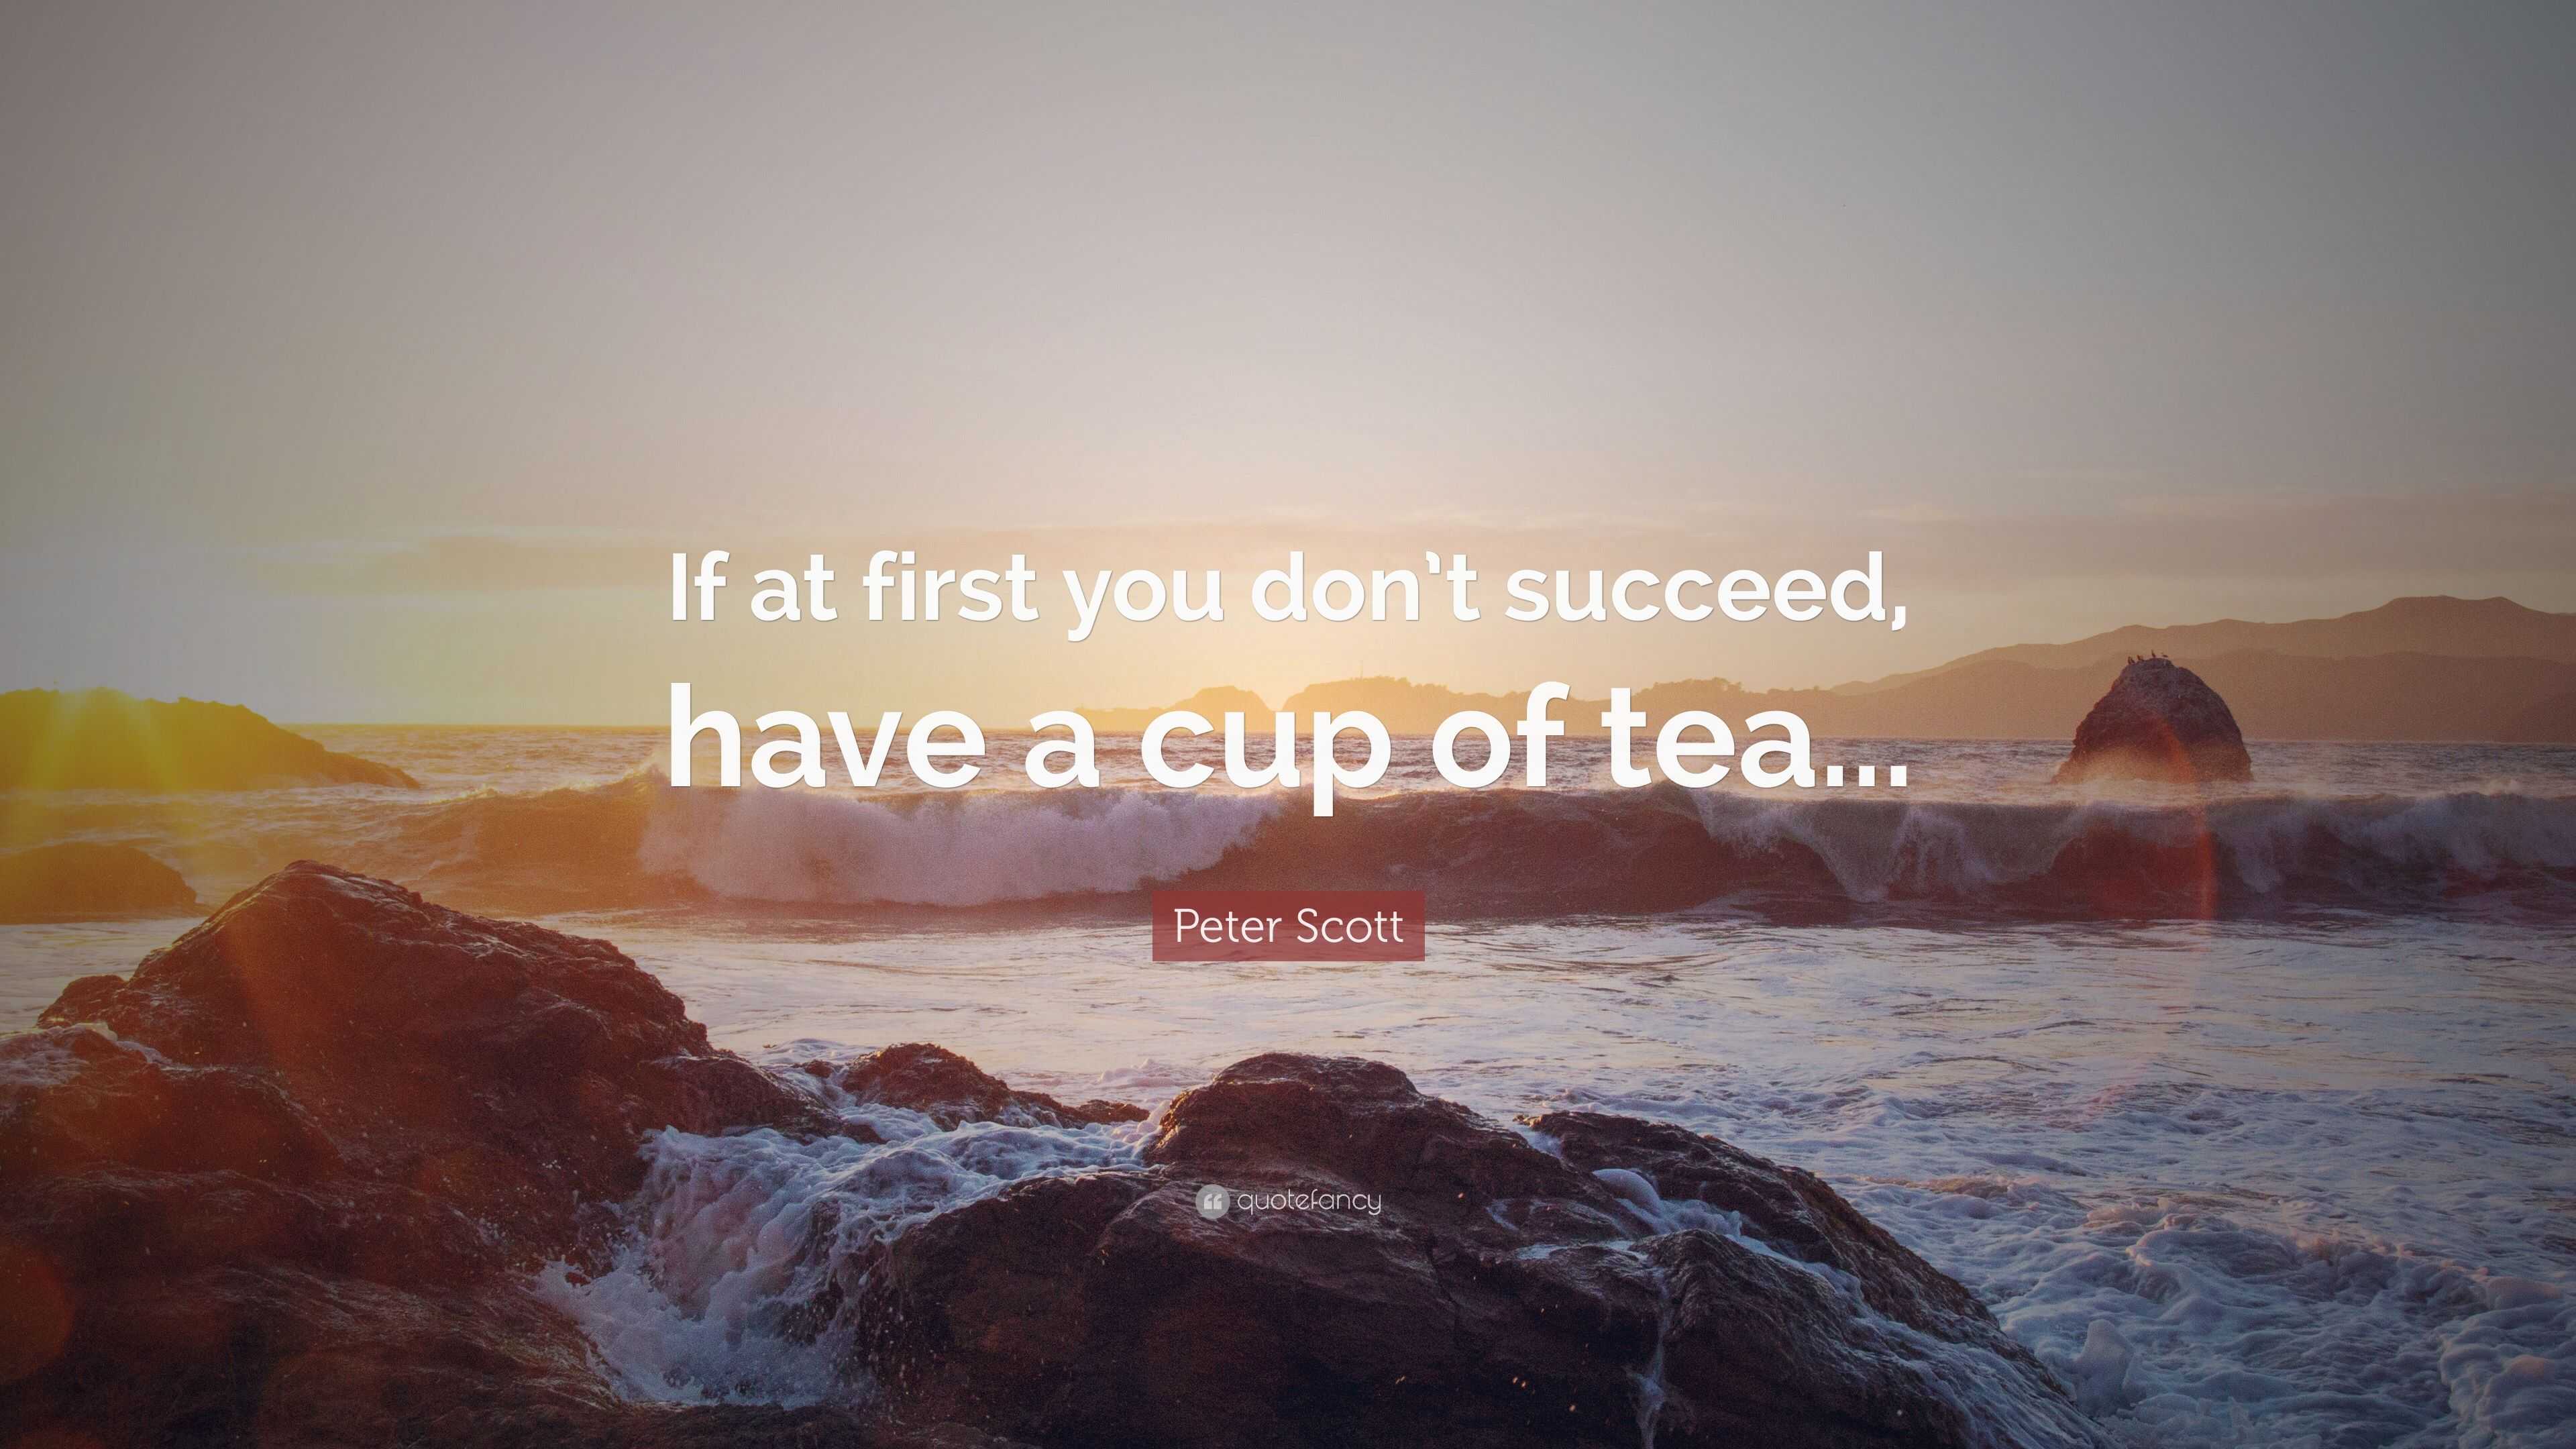 Peter Scott Quote: “If at first you don't succeed, have a cup of tea...”